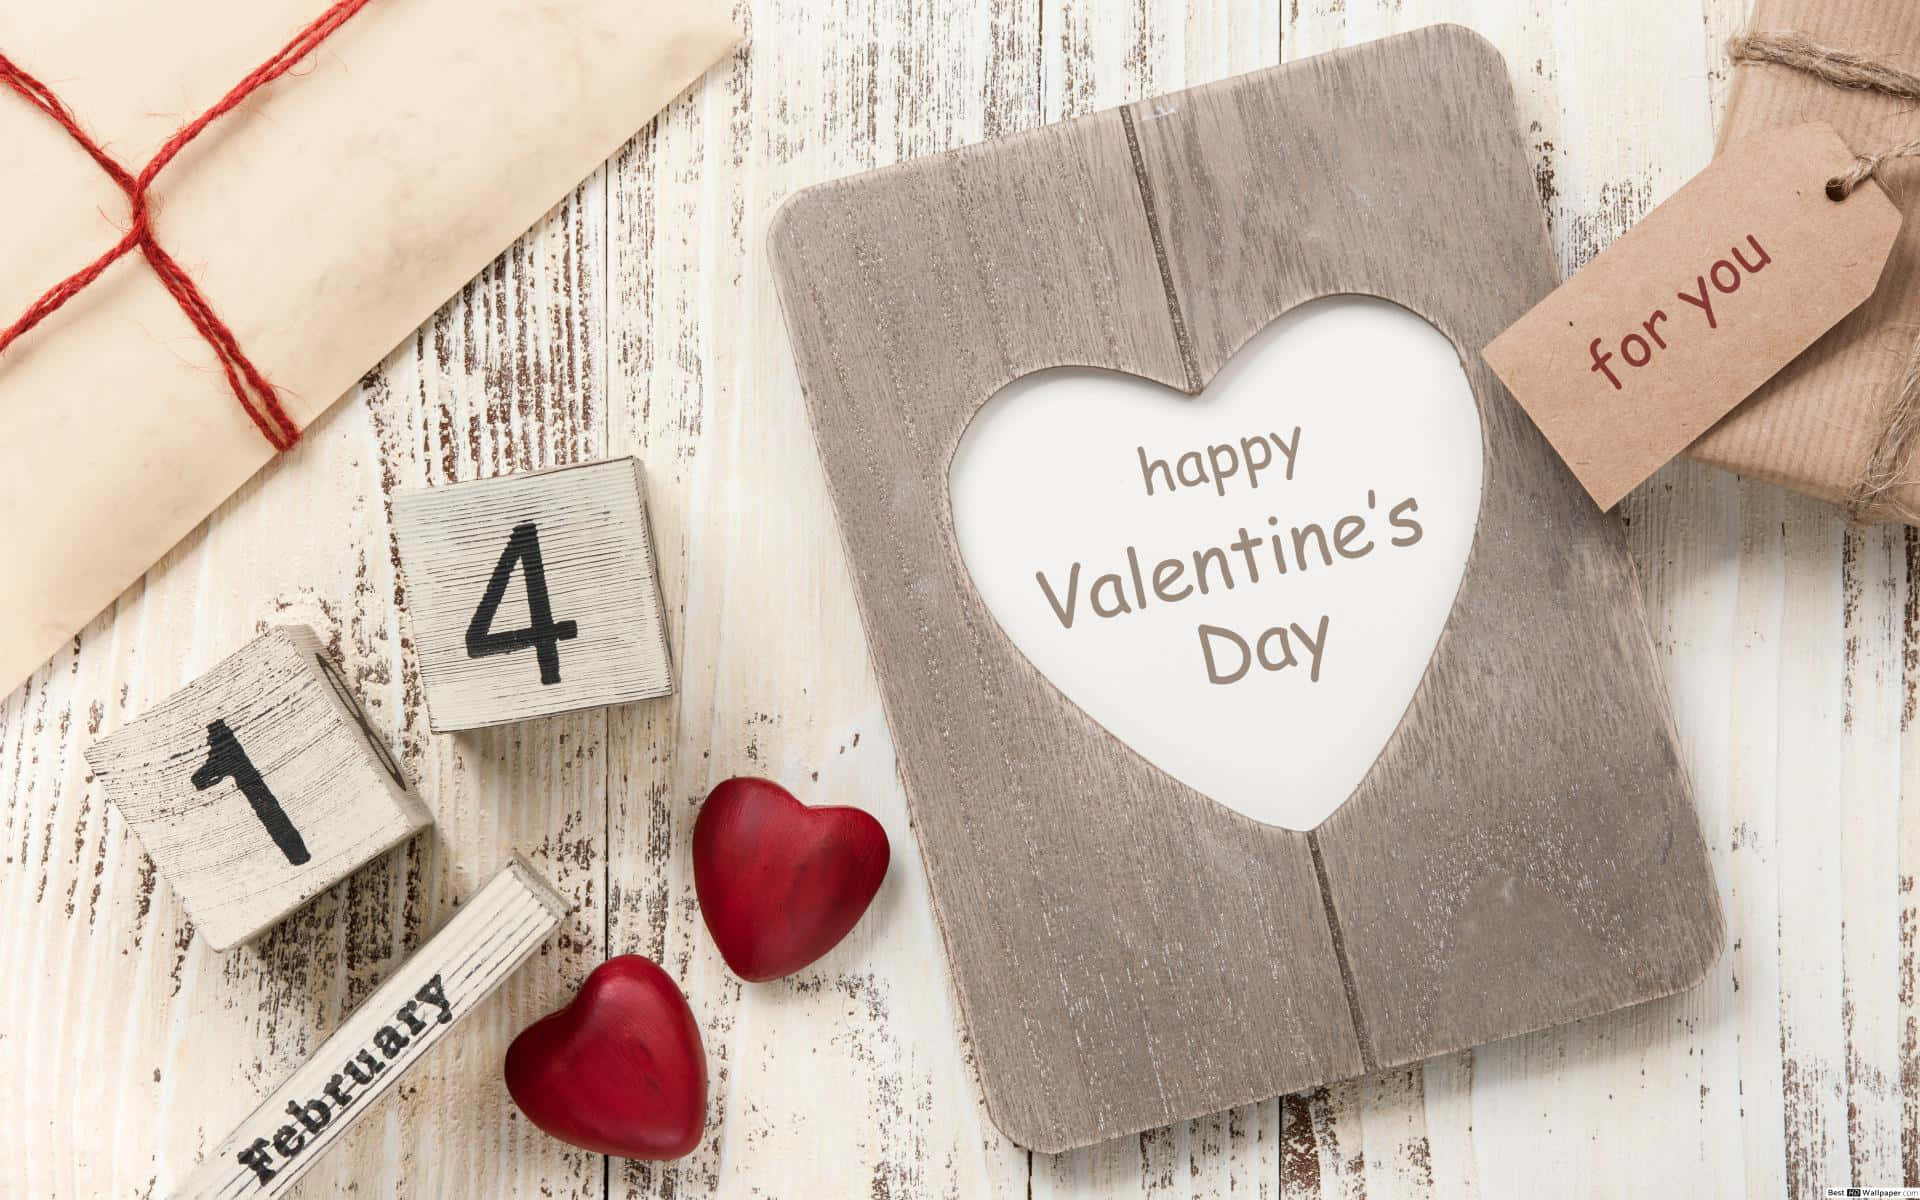 Spread the love this Rustic Valentine's Day Wallpaper